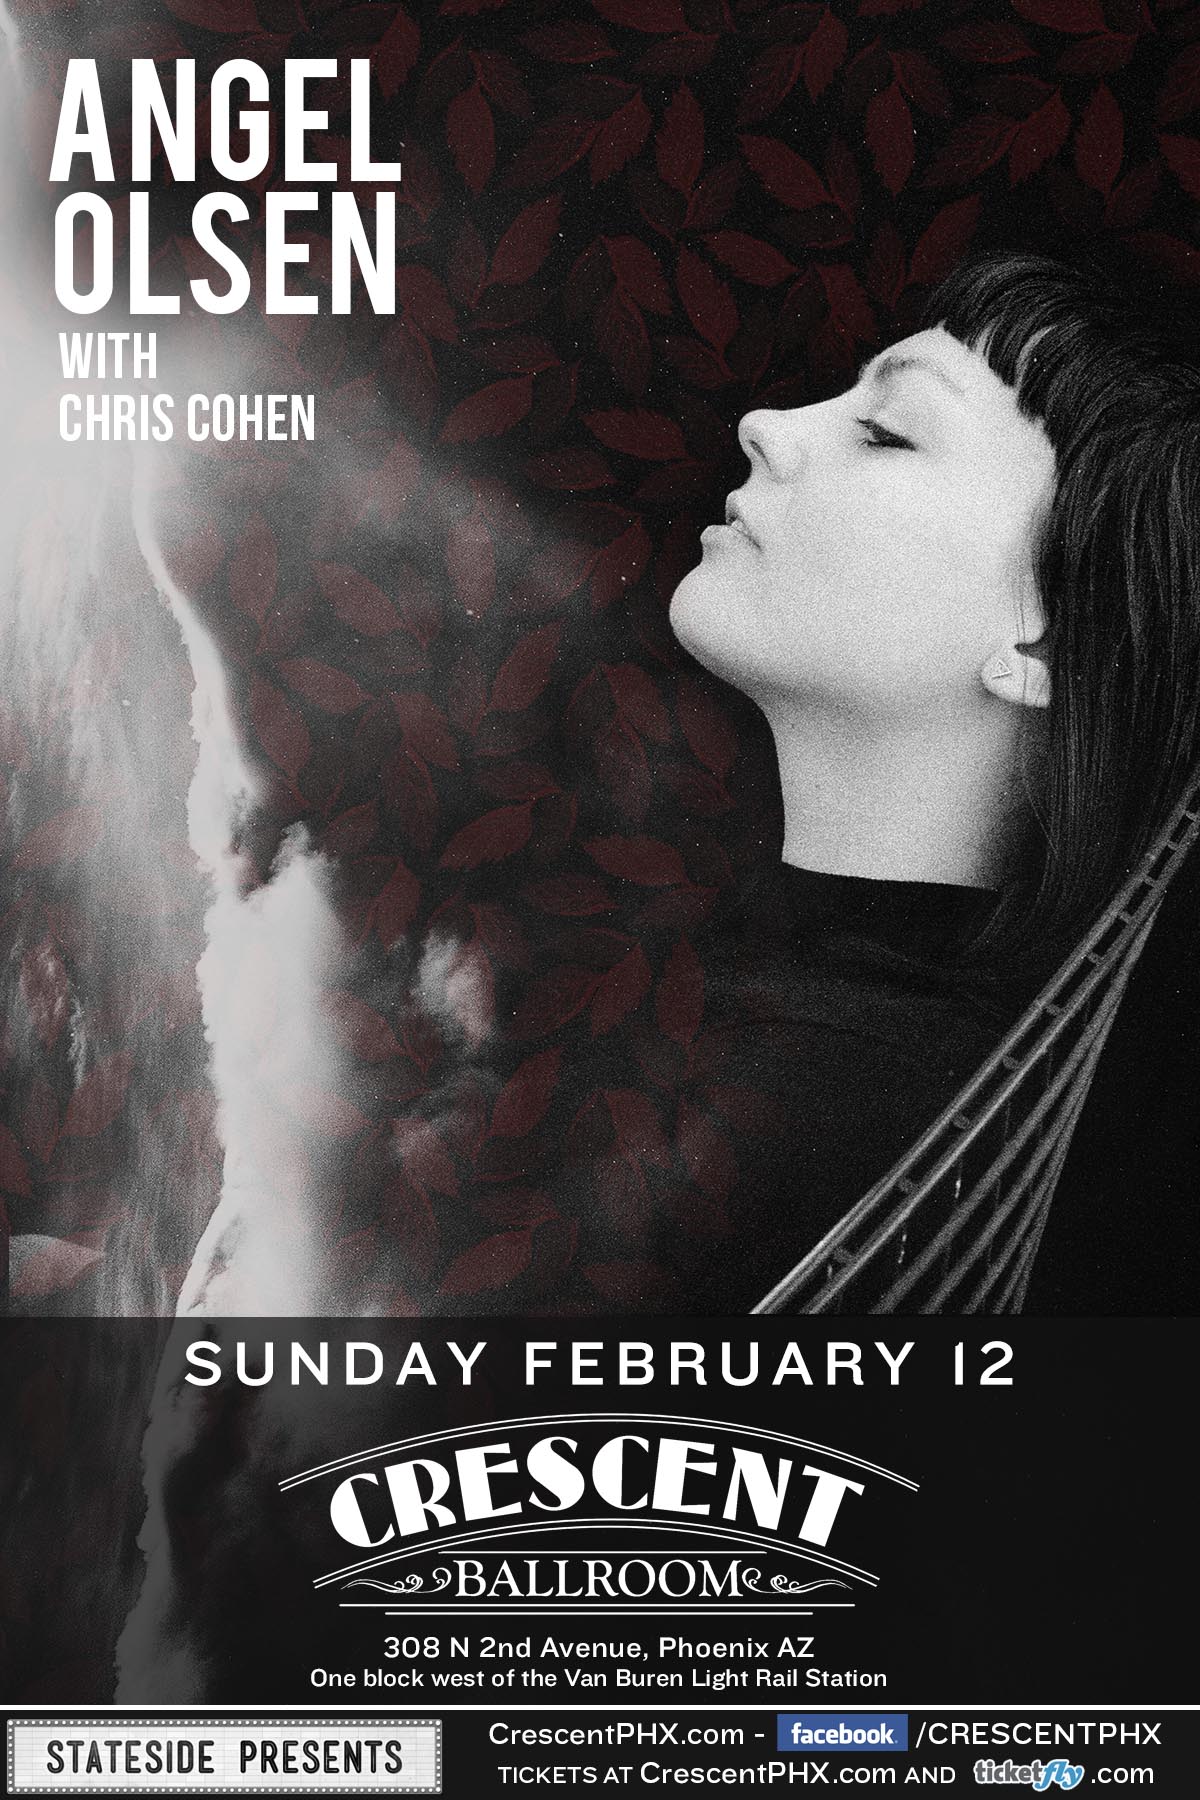 Win tickets to ANGEL OLSEN live at Crescent Ballroom